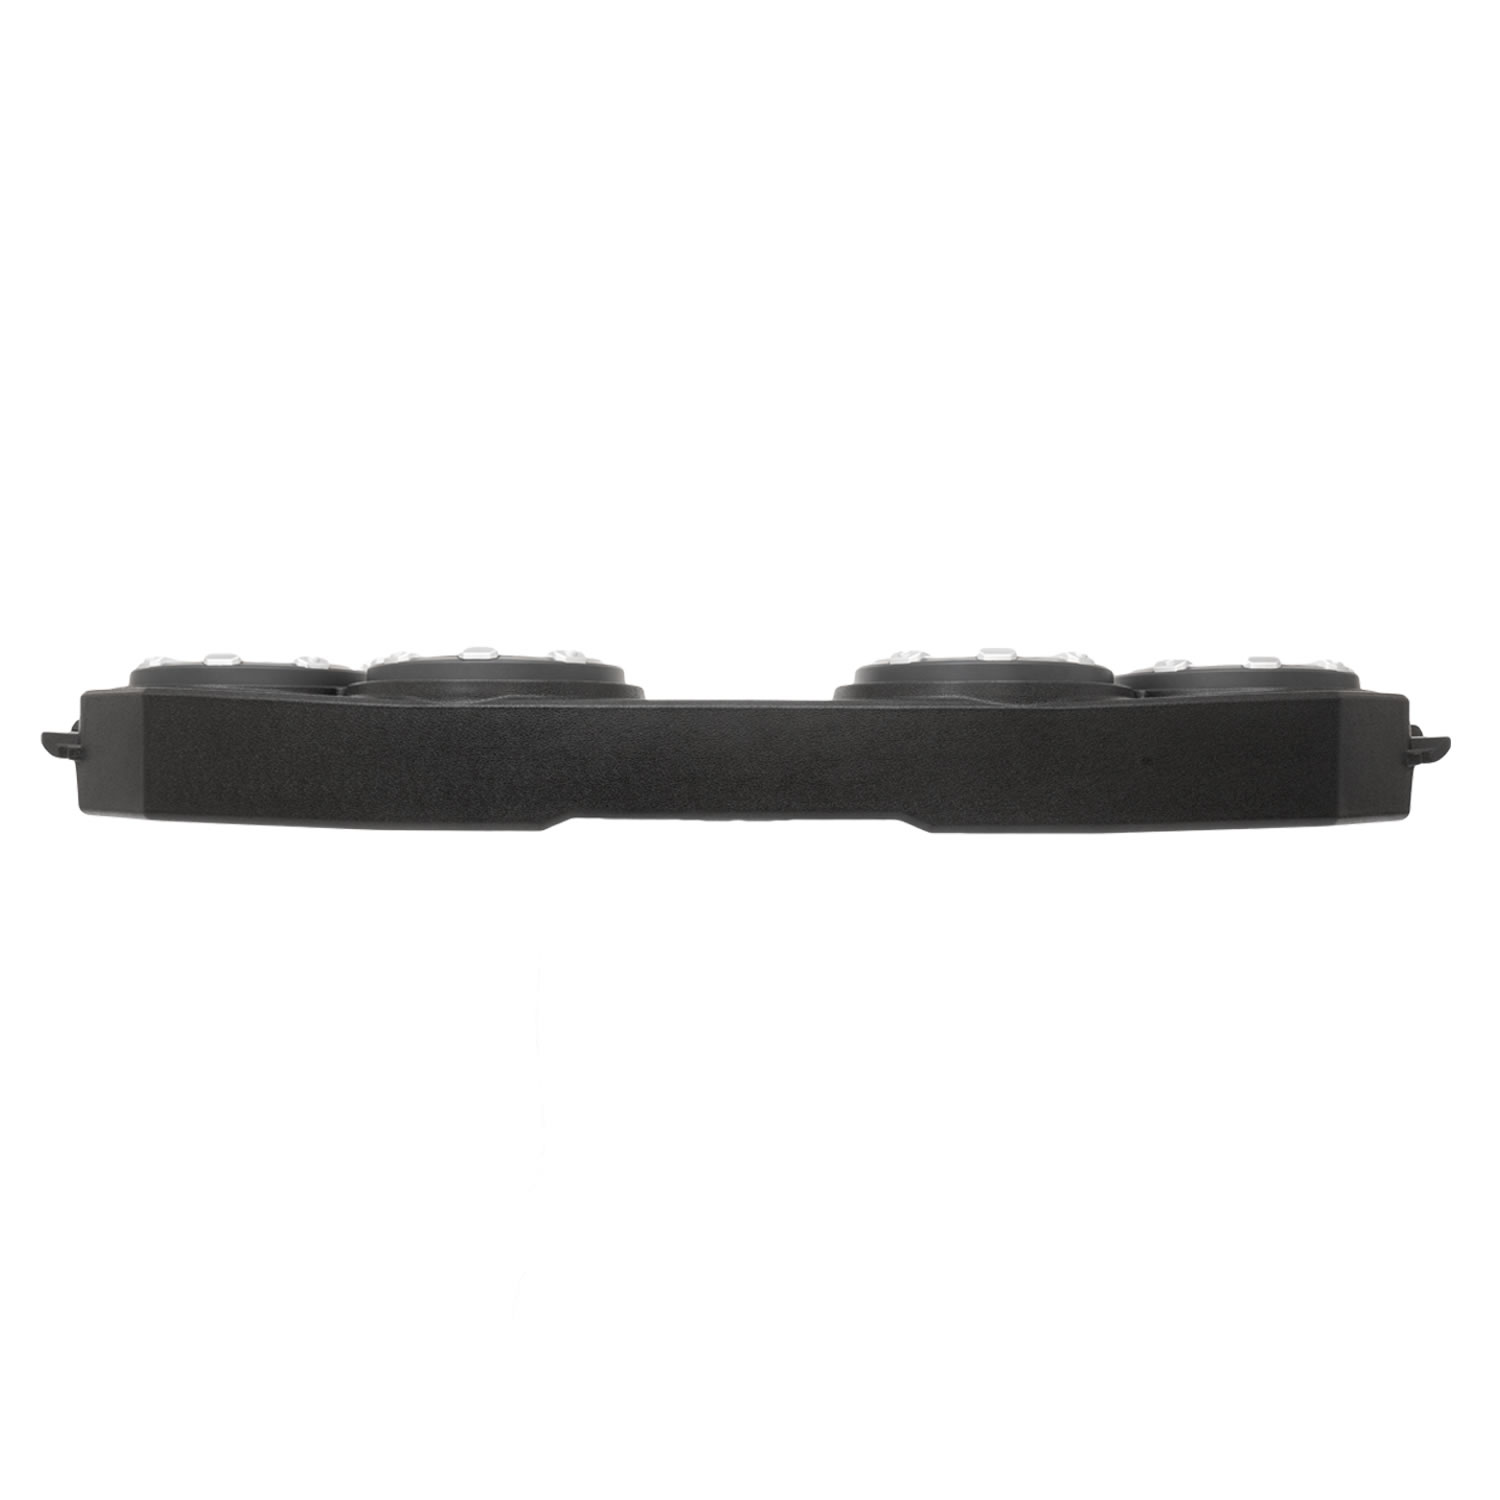 MBQJ-48C Jeep® Wrangler (JL) / Gladiator (JT) Tuned Rear Soundbar with 8  Inch Coaxial Speakers and Enclosure